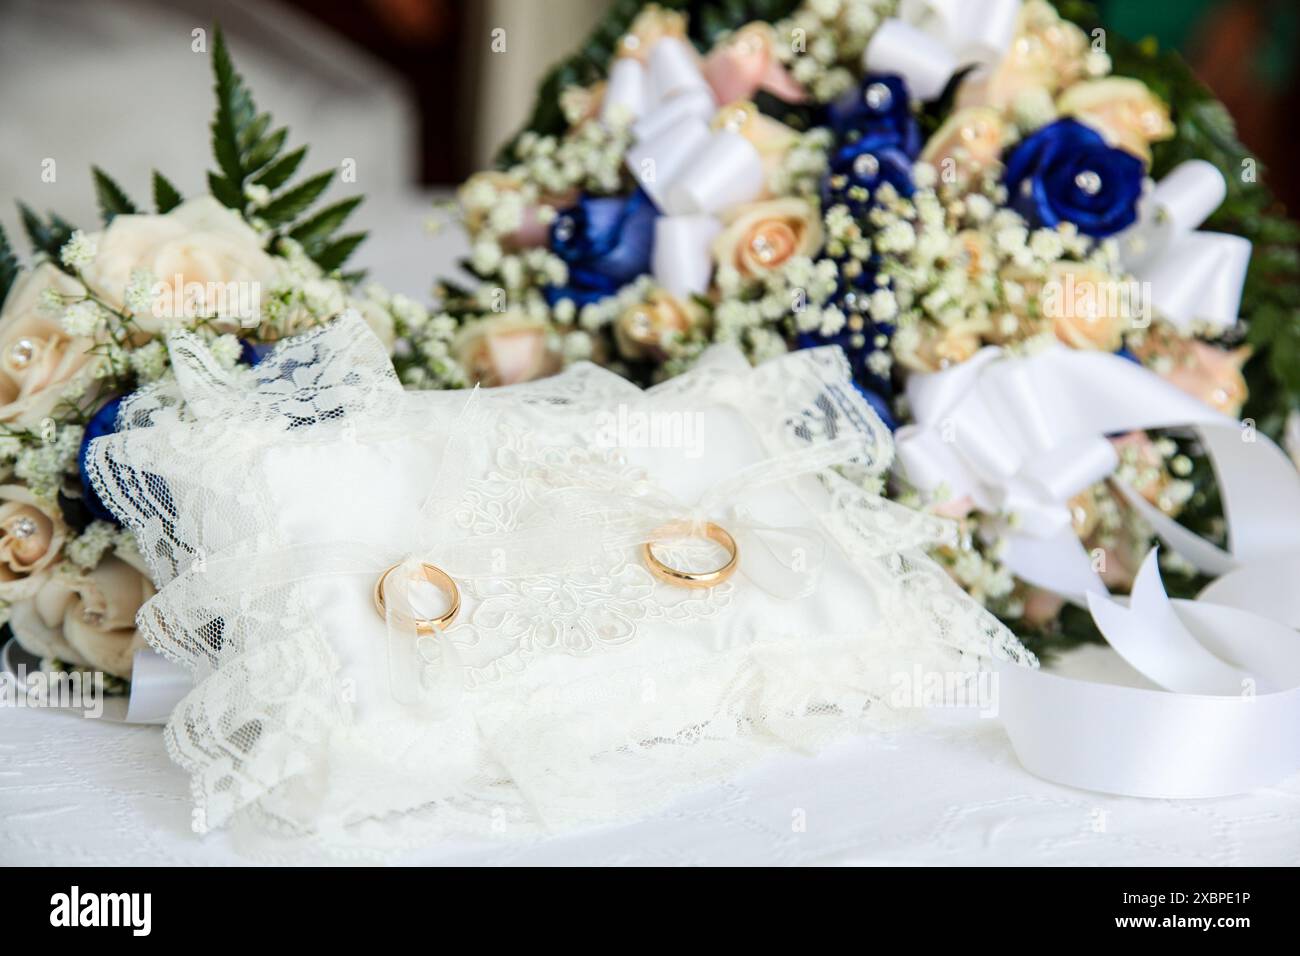 Two golden wedding bands rest on a delicate white lace pillow, representing the sacred bond of marriage between two individuals Stock Photo